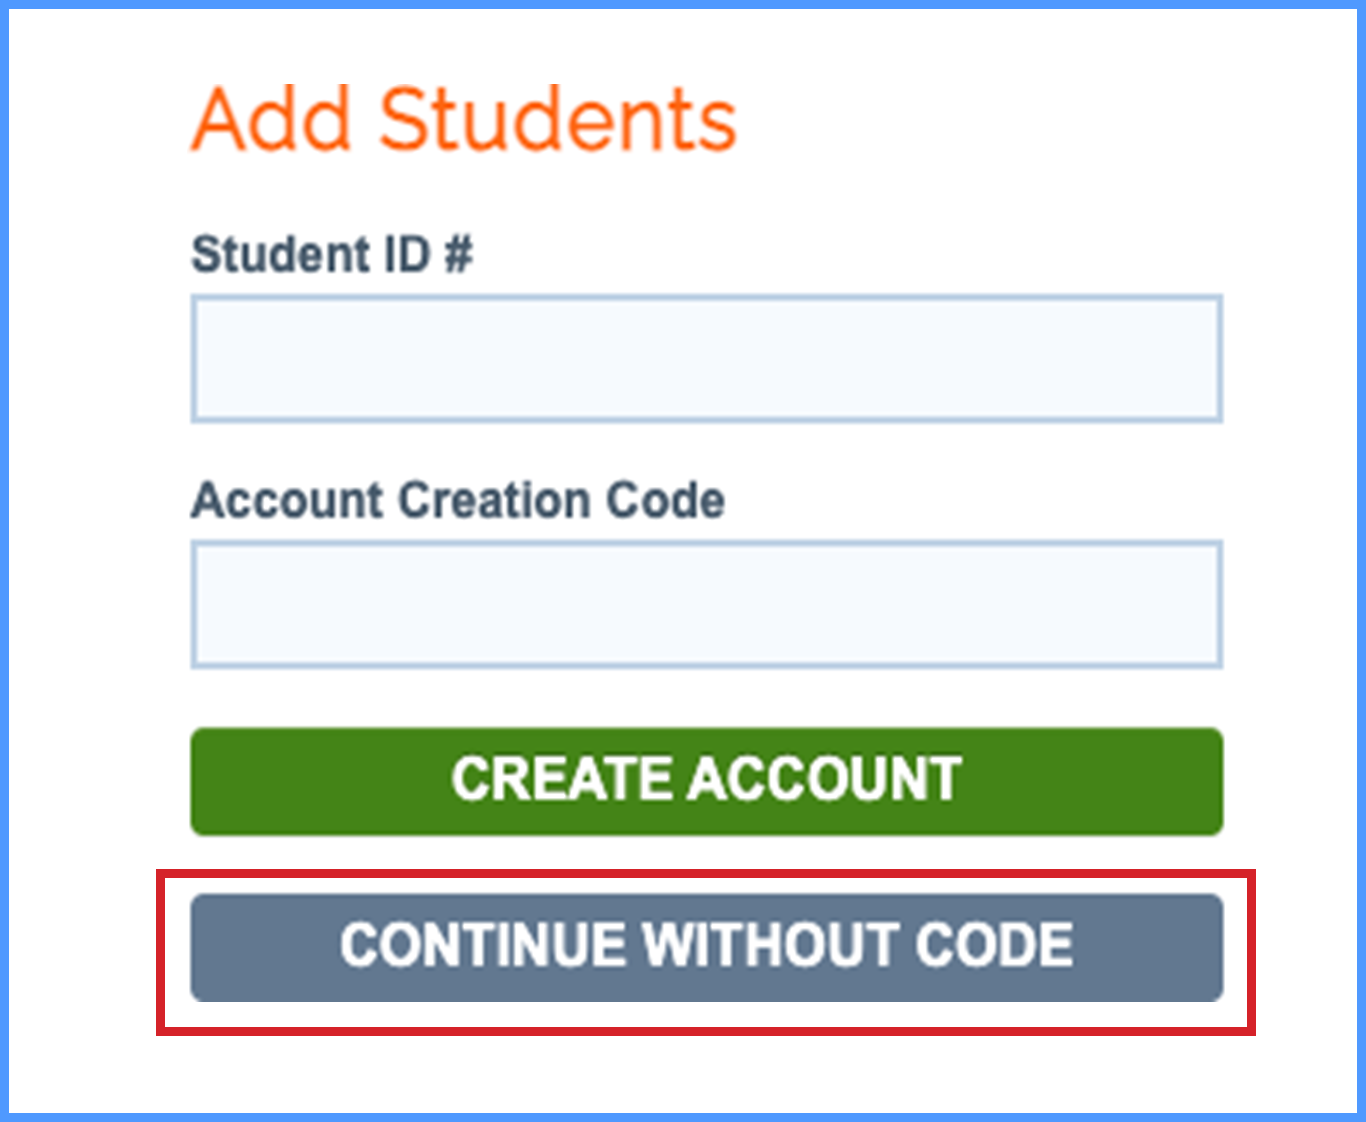 Add Student ID number page with “Continue without Code” squared in red